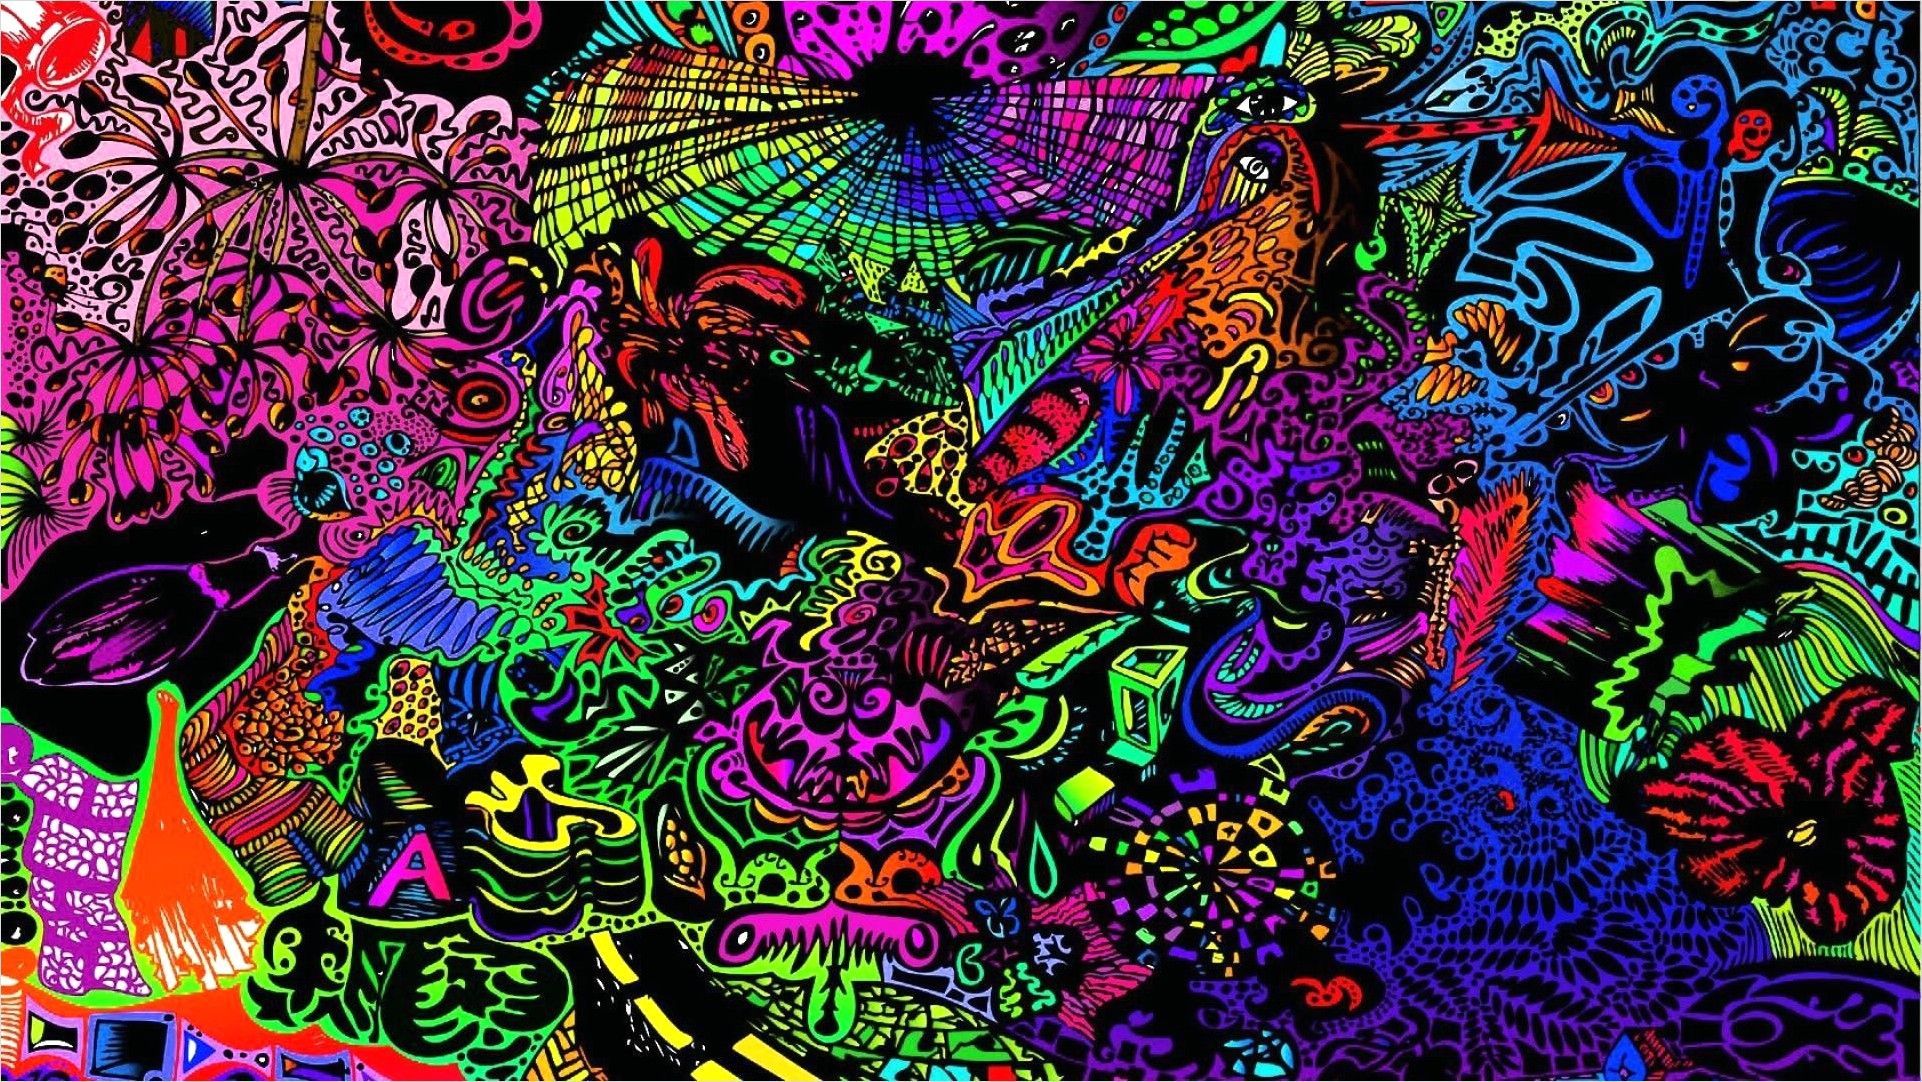 Psychedelic Hd 4k Wallpapers Top Free Psychedelic Hd 4k Backgrounds Wallpaperaccess